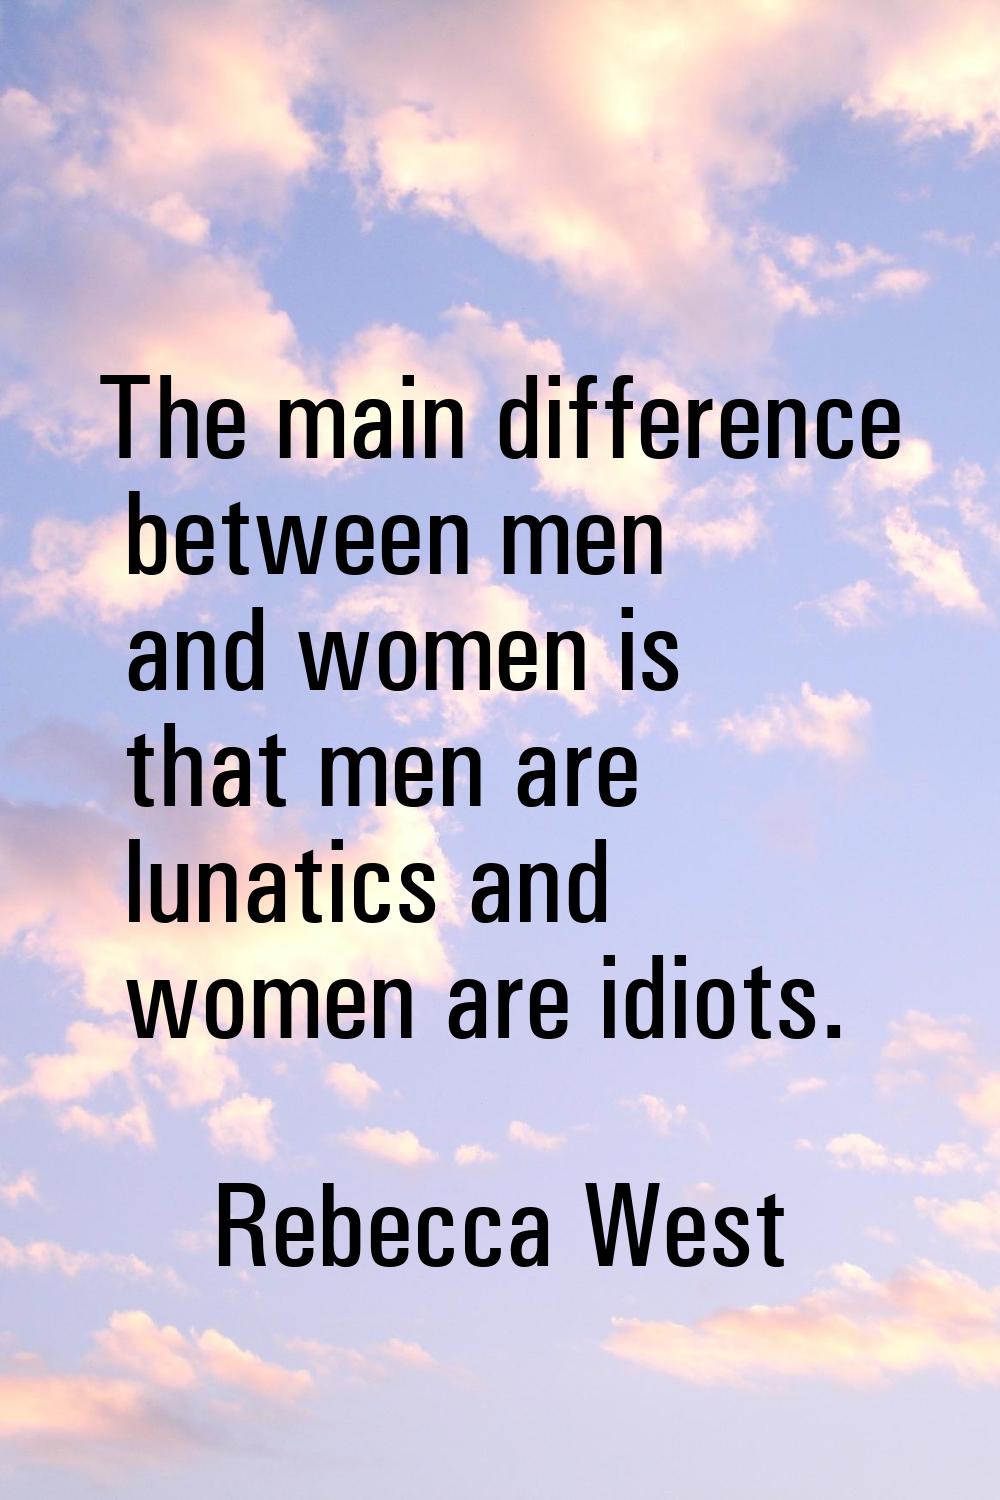 The main difference between men and women is that men are lunatics and women are idiots.